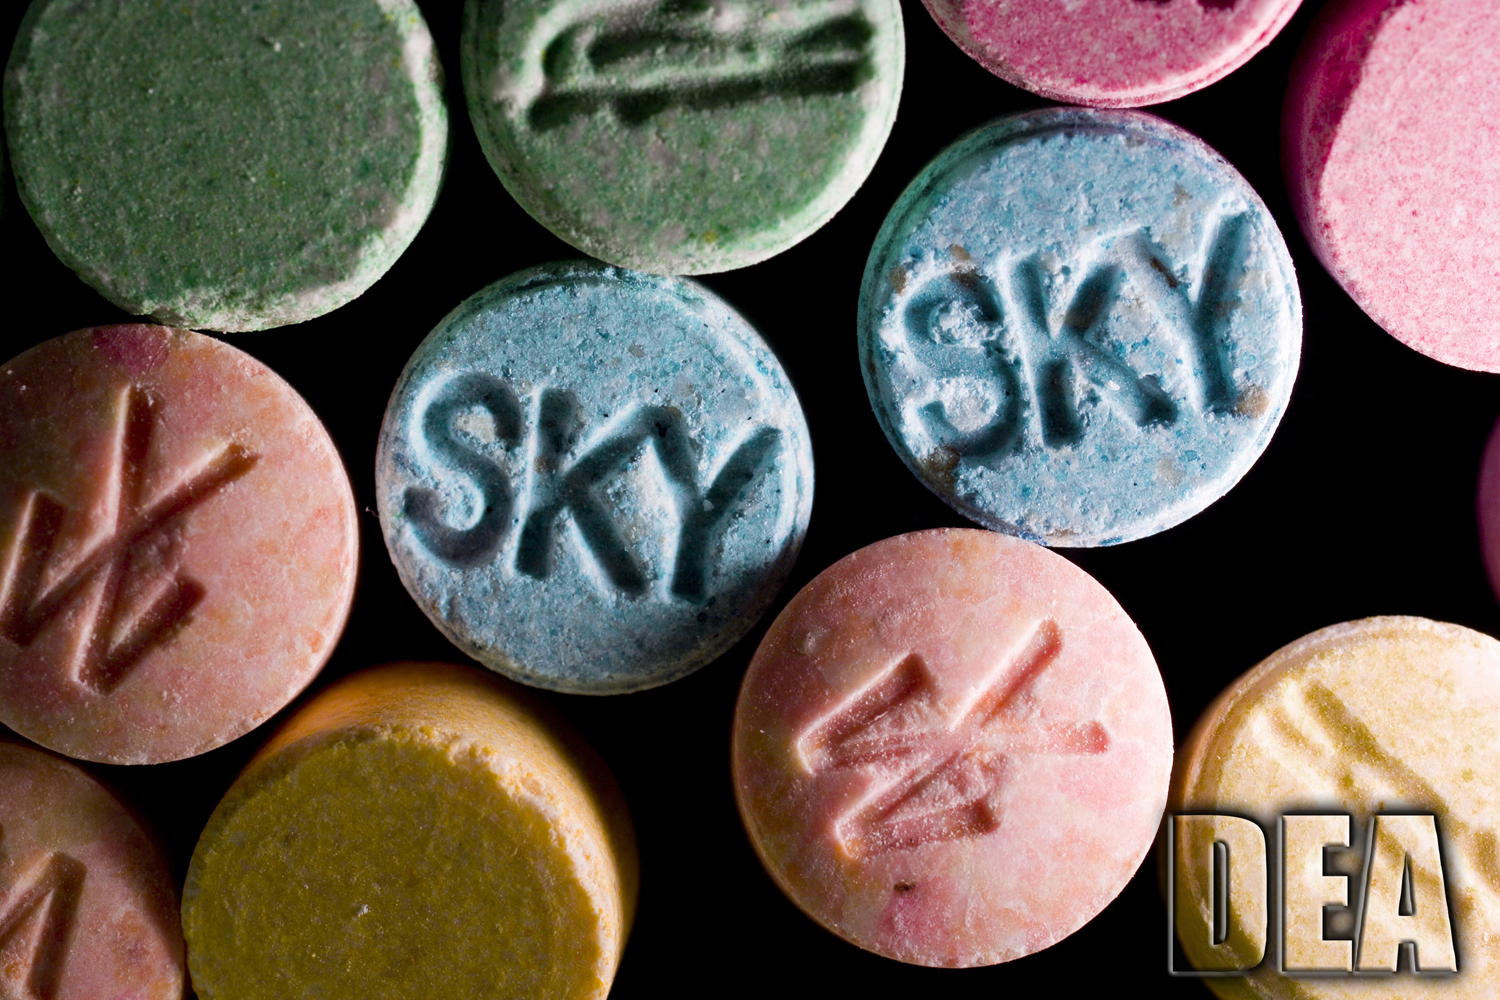 Undated handout of ecstasy pills, which contain MDMA as their main chemical